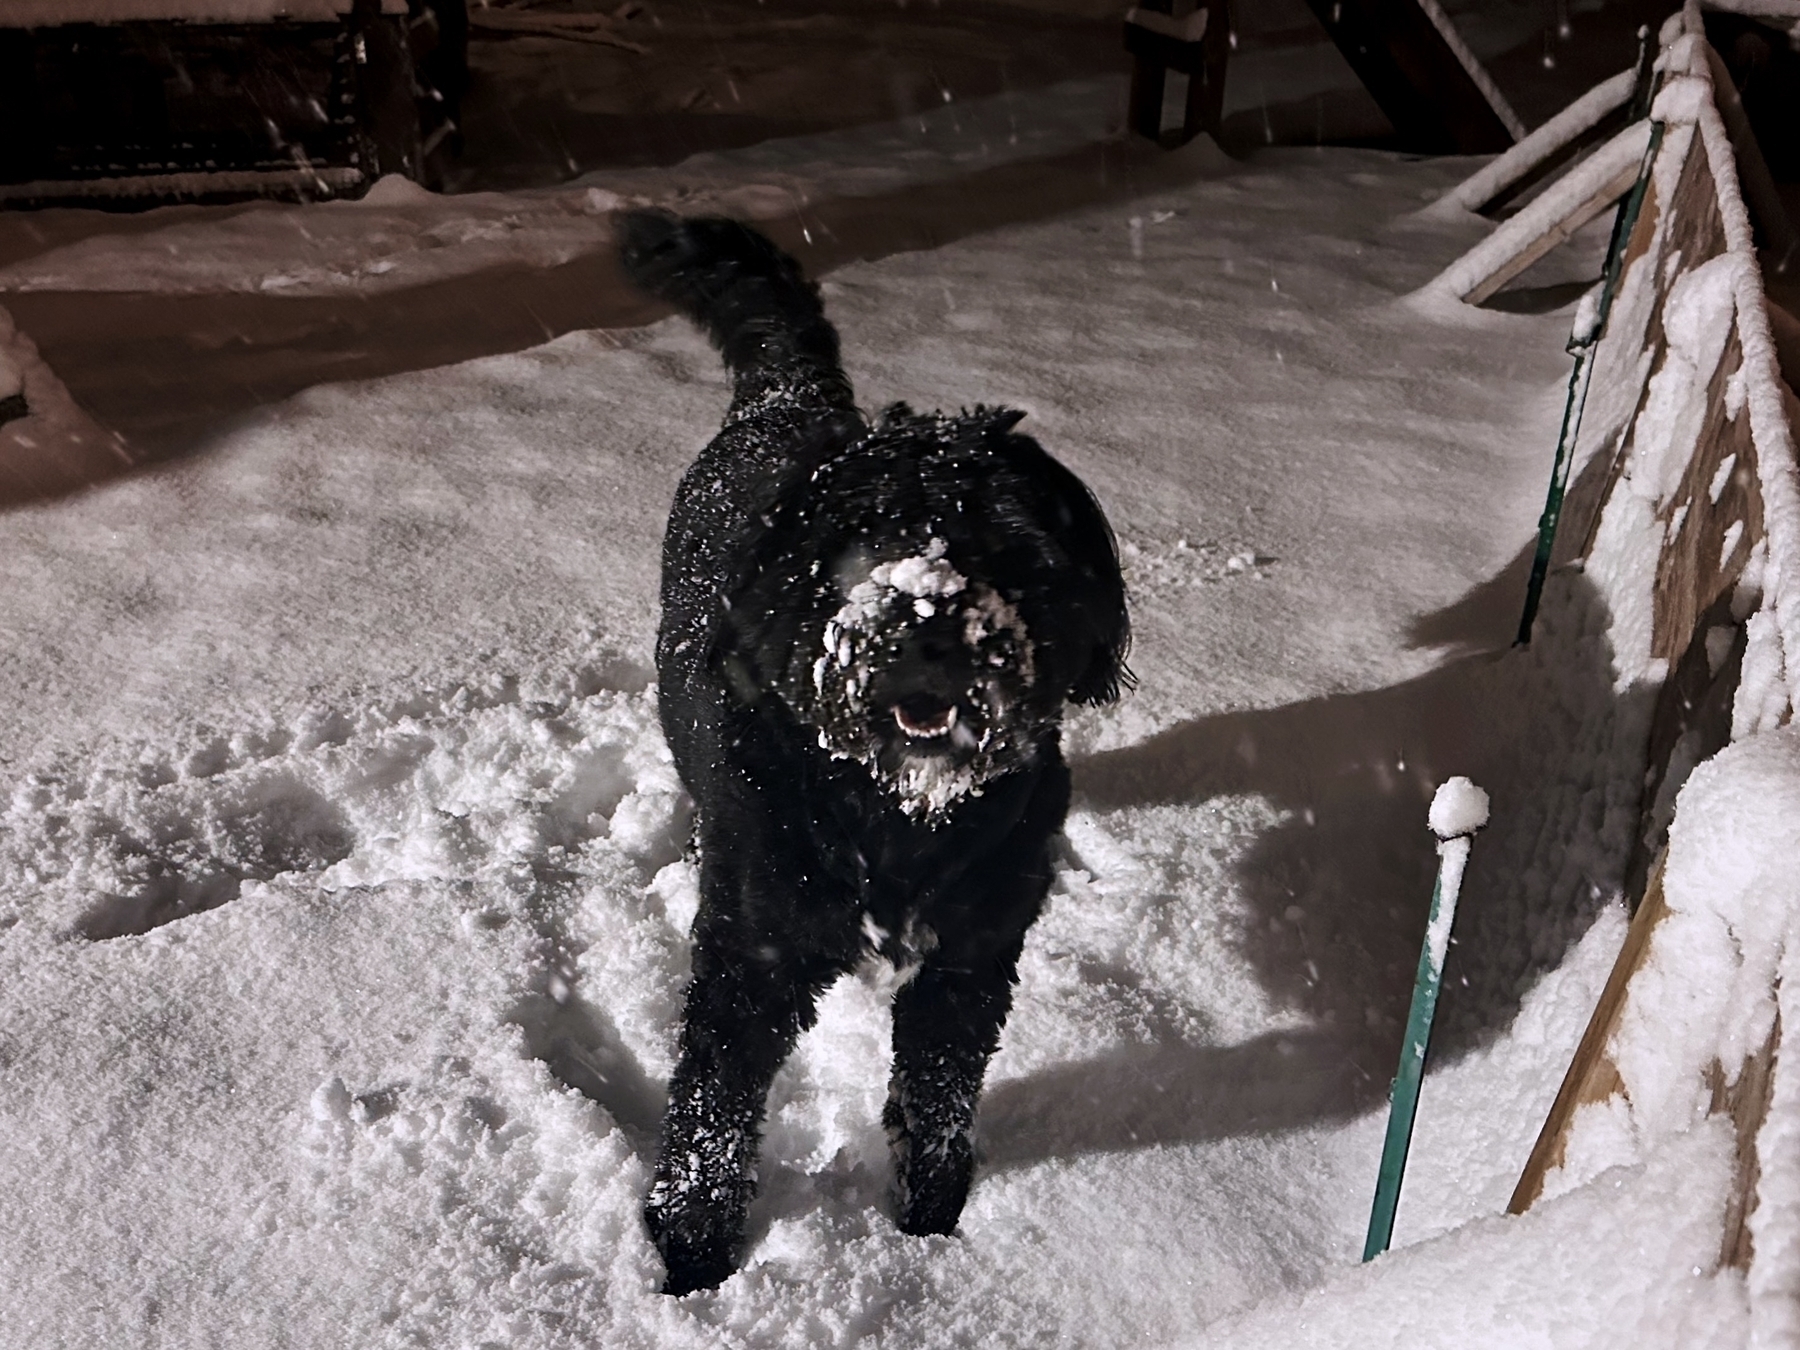 A black dog with snow on its face and body is standing against a white background.